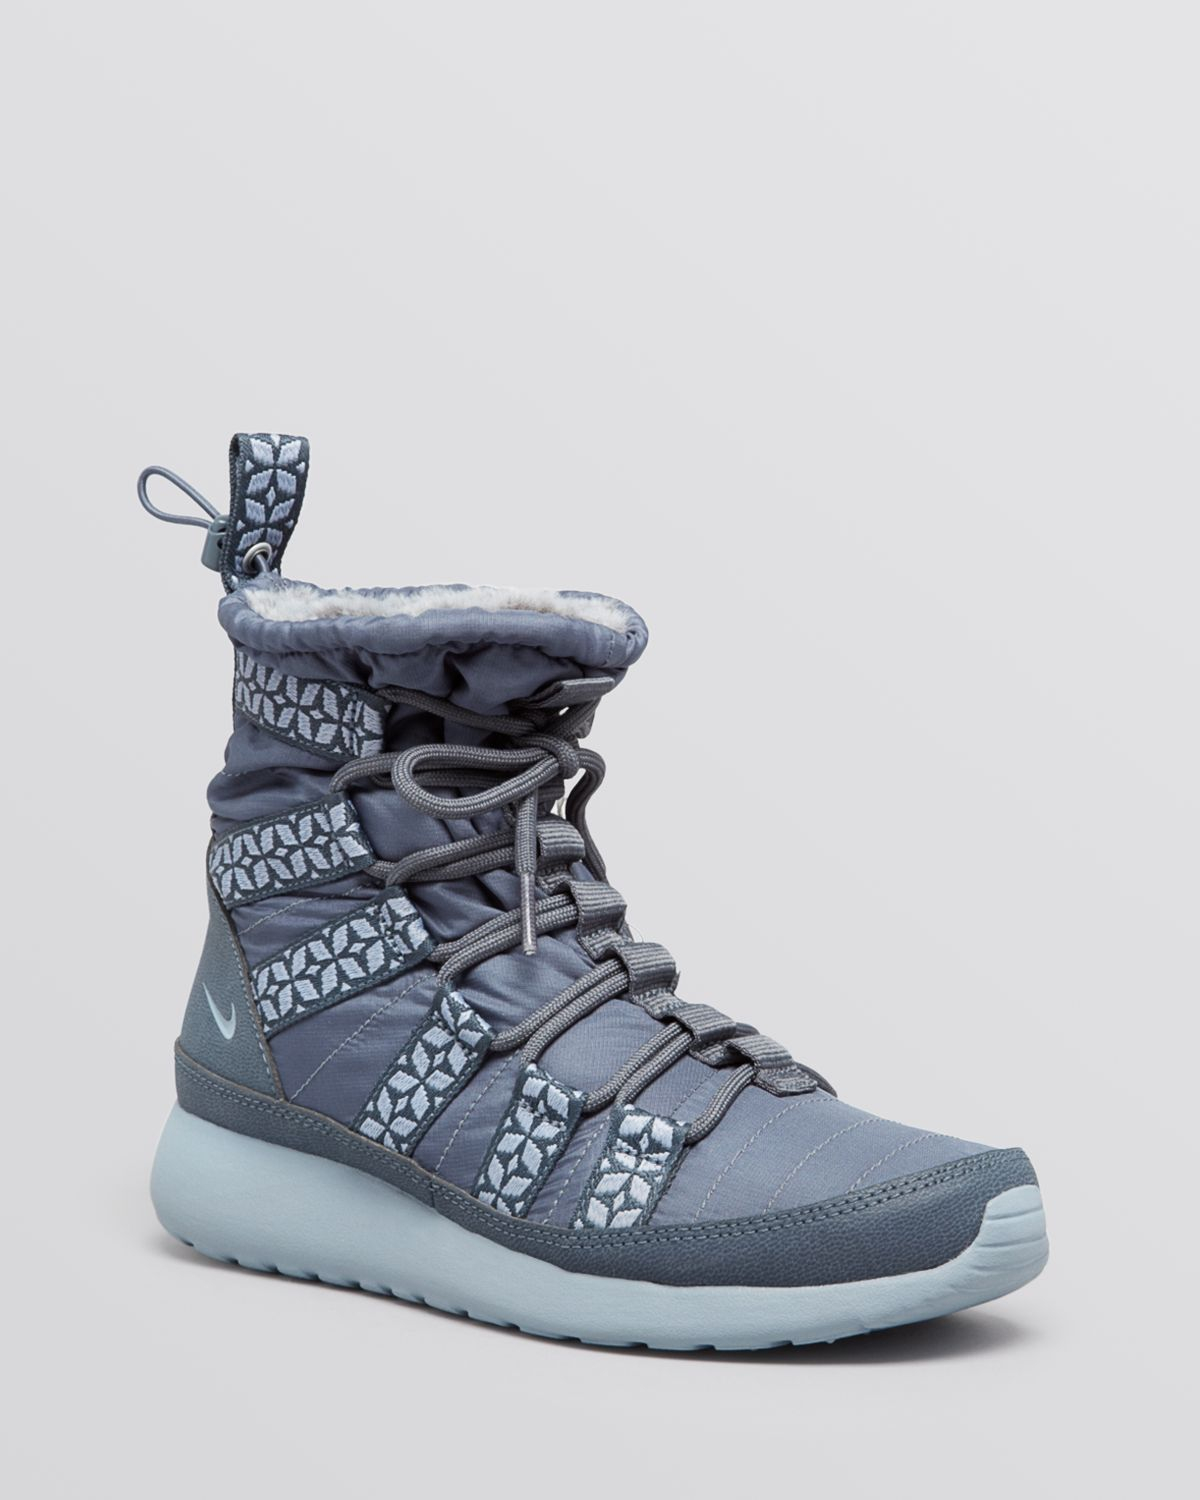 Lyst - Nike High Top Cold Weather Sneakers - Womens -6259